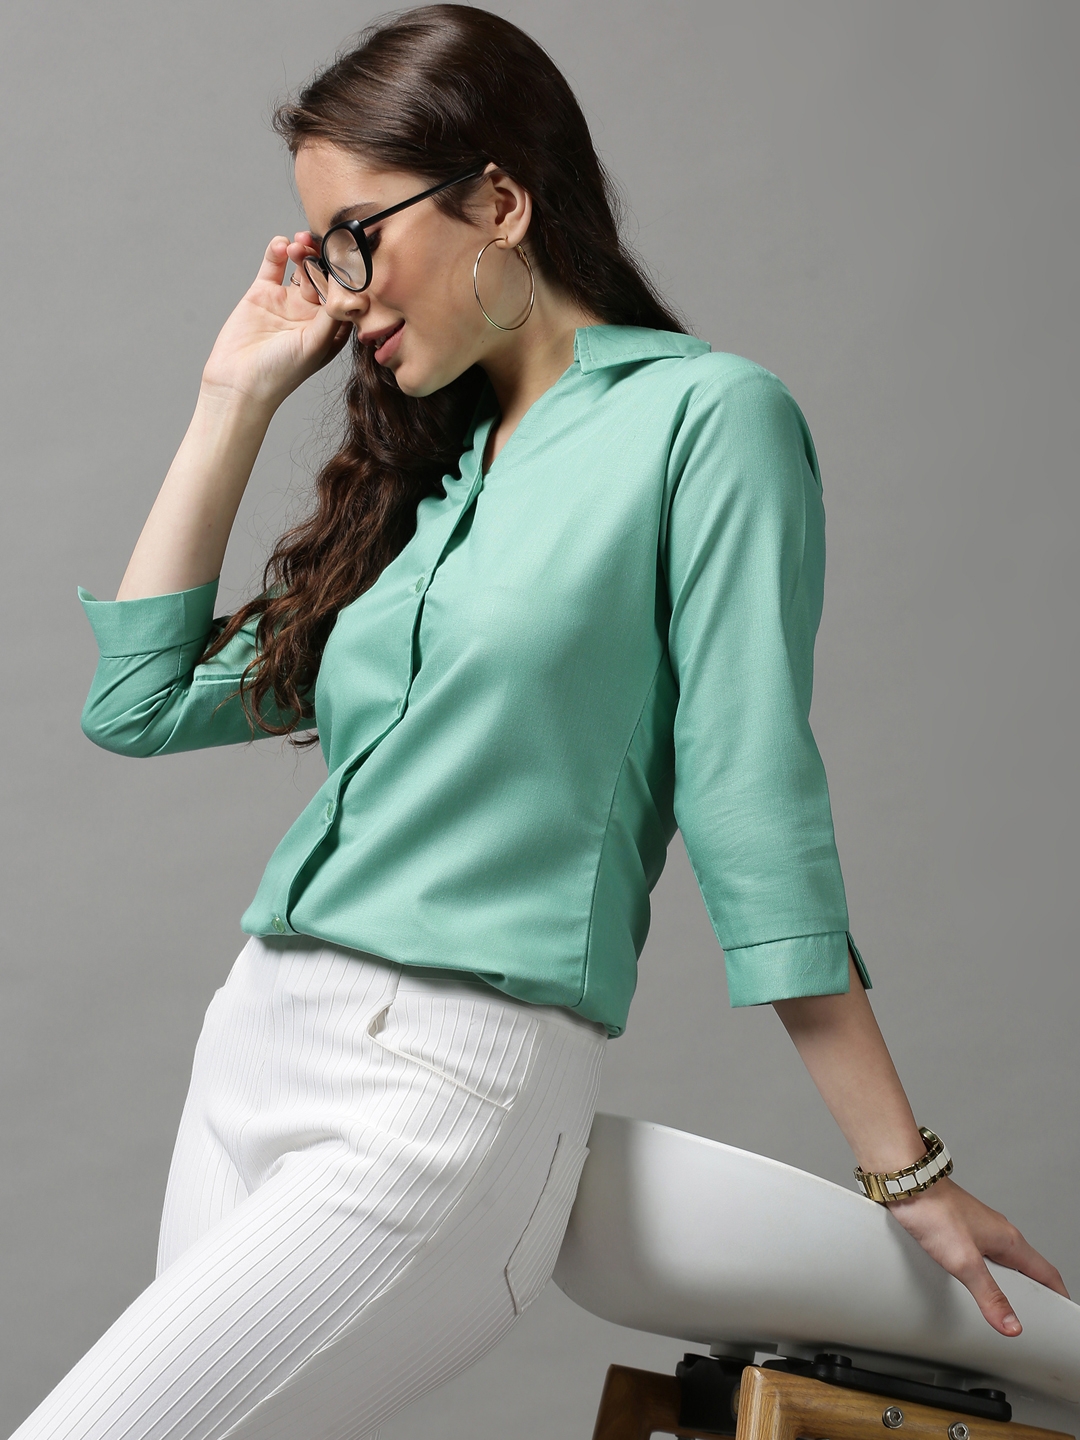 SHOWOFF Women's Spread Collar Solid Green Polyester Shirt